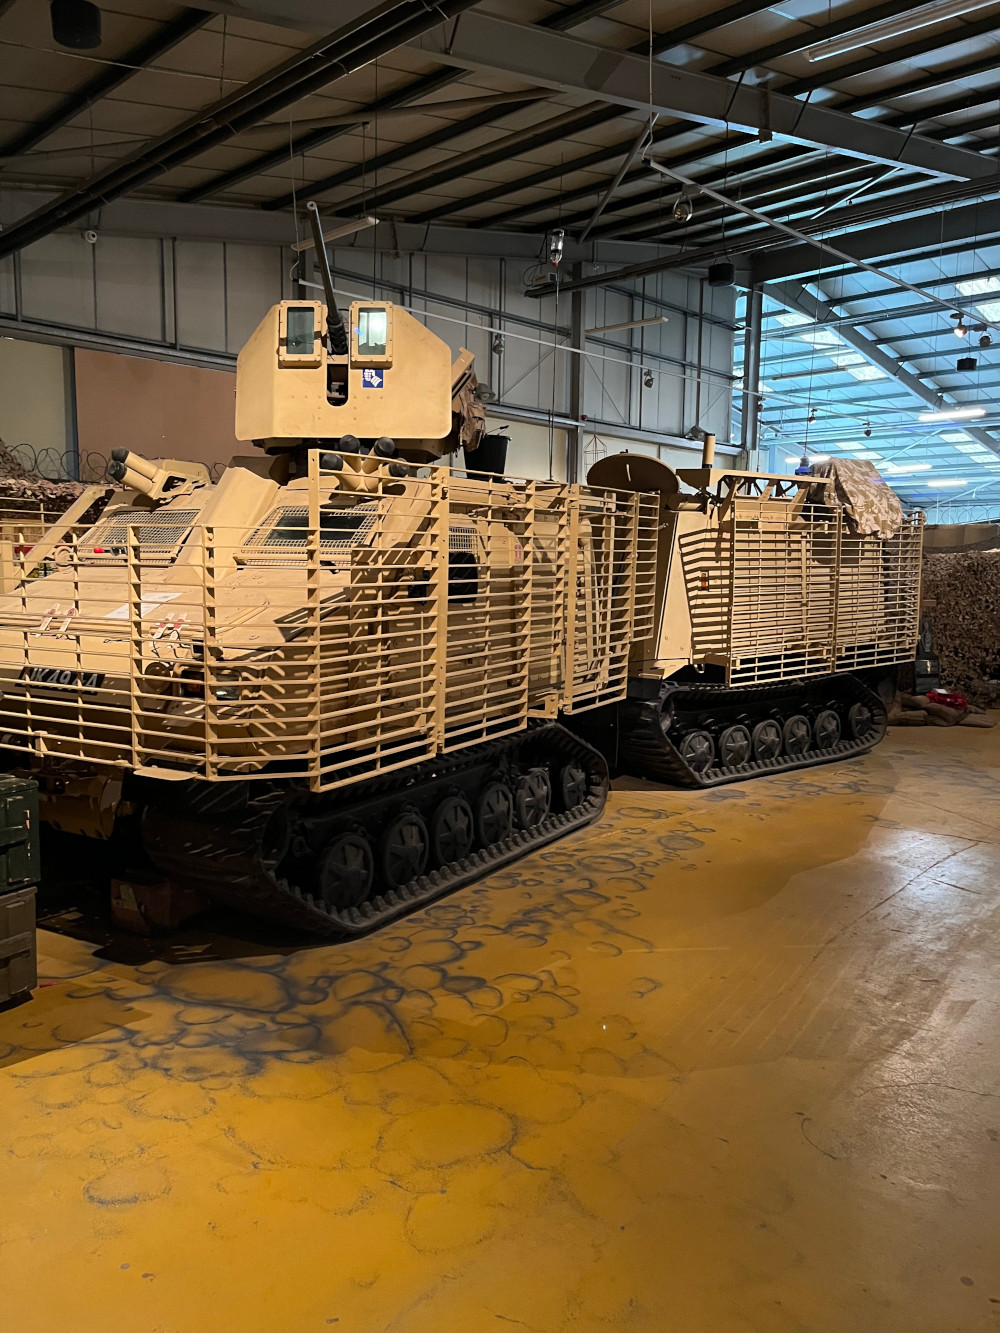 The Viking all-terrain vehicle from Afghanistan at Bovington Tank Museum